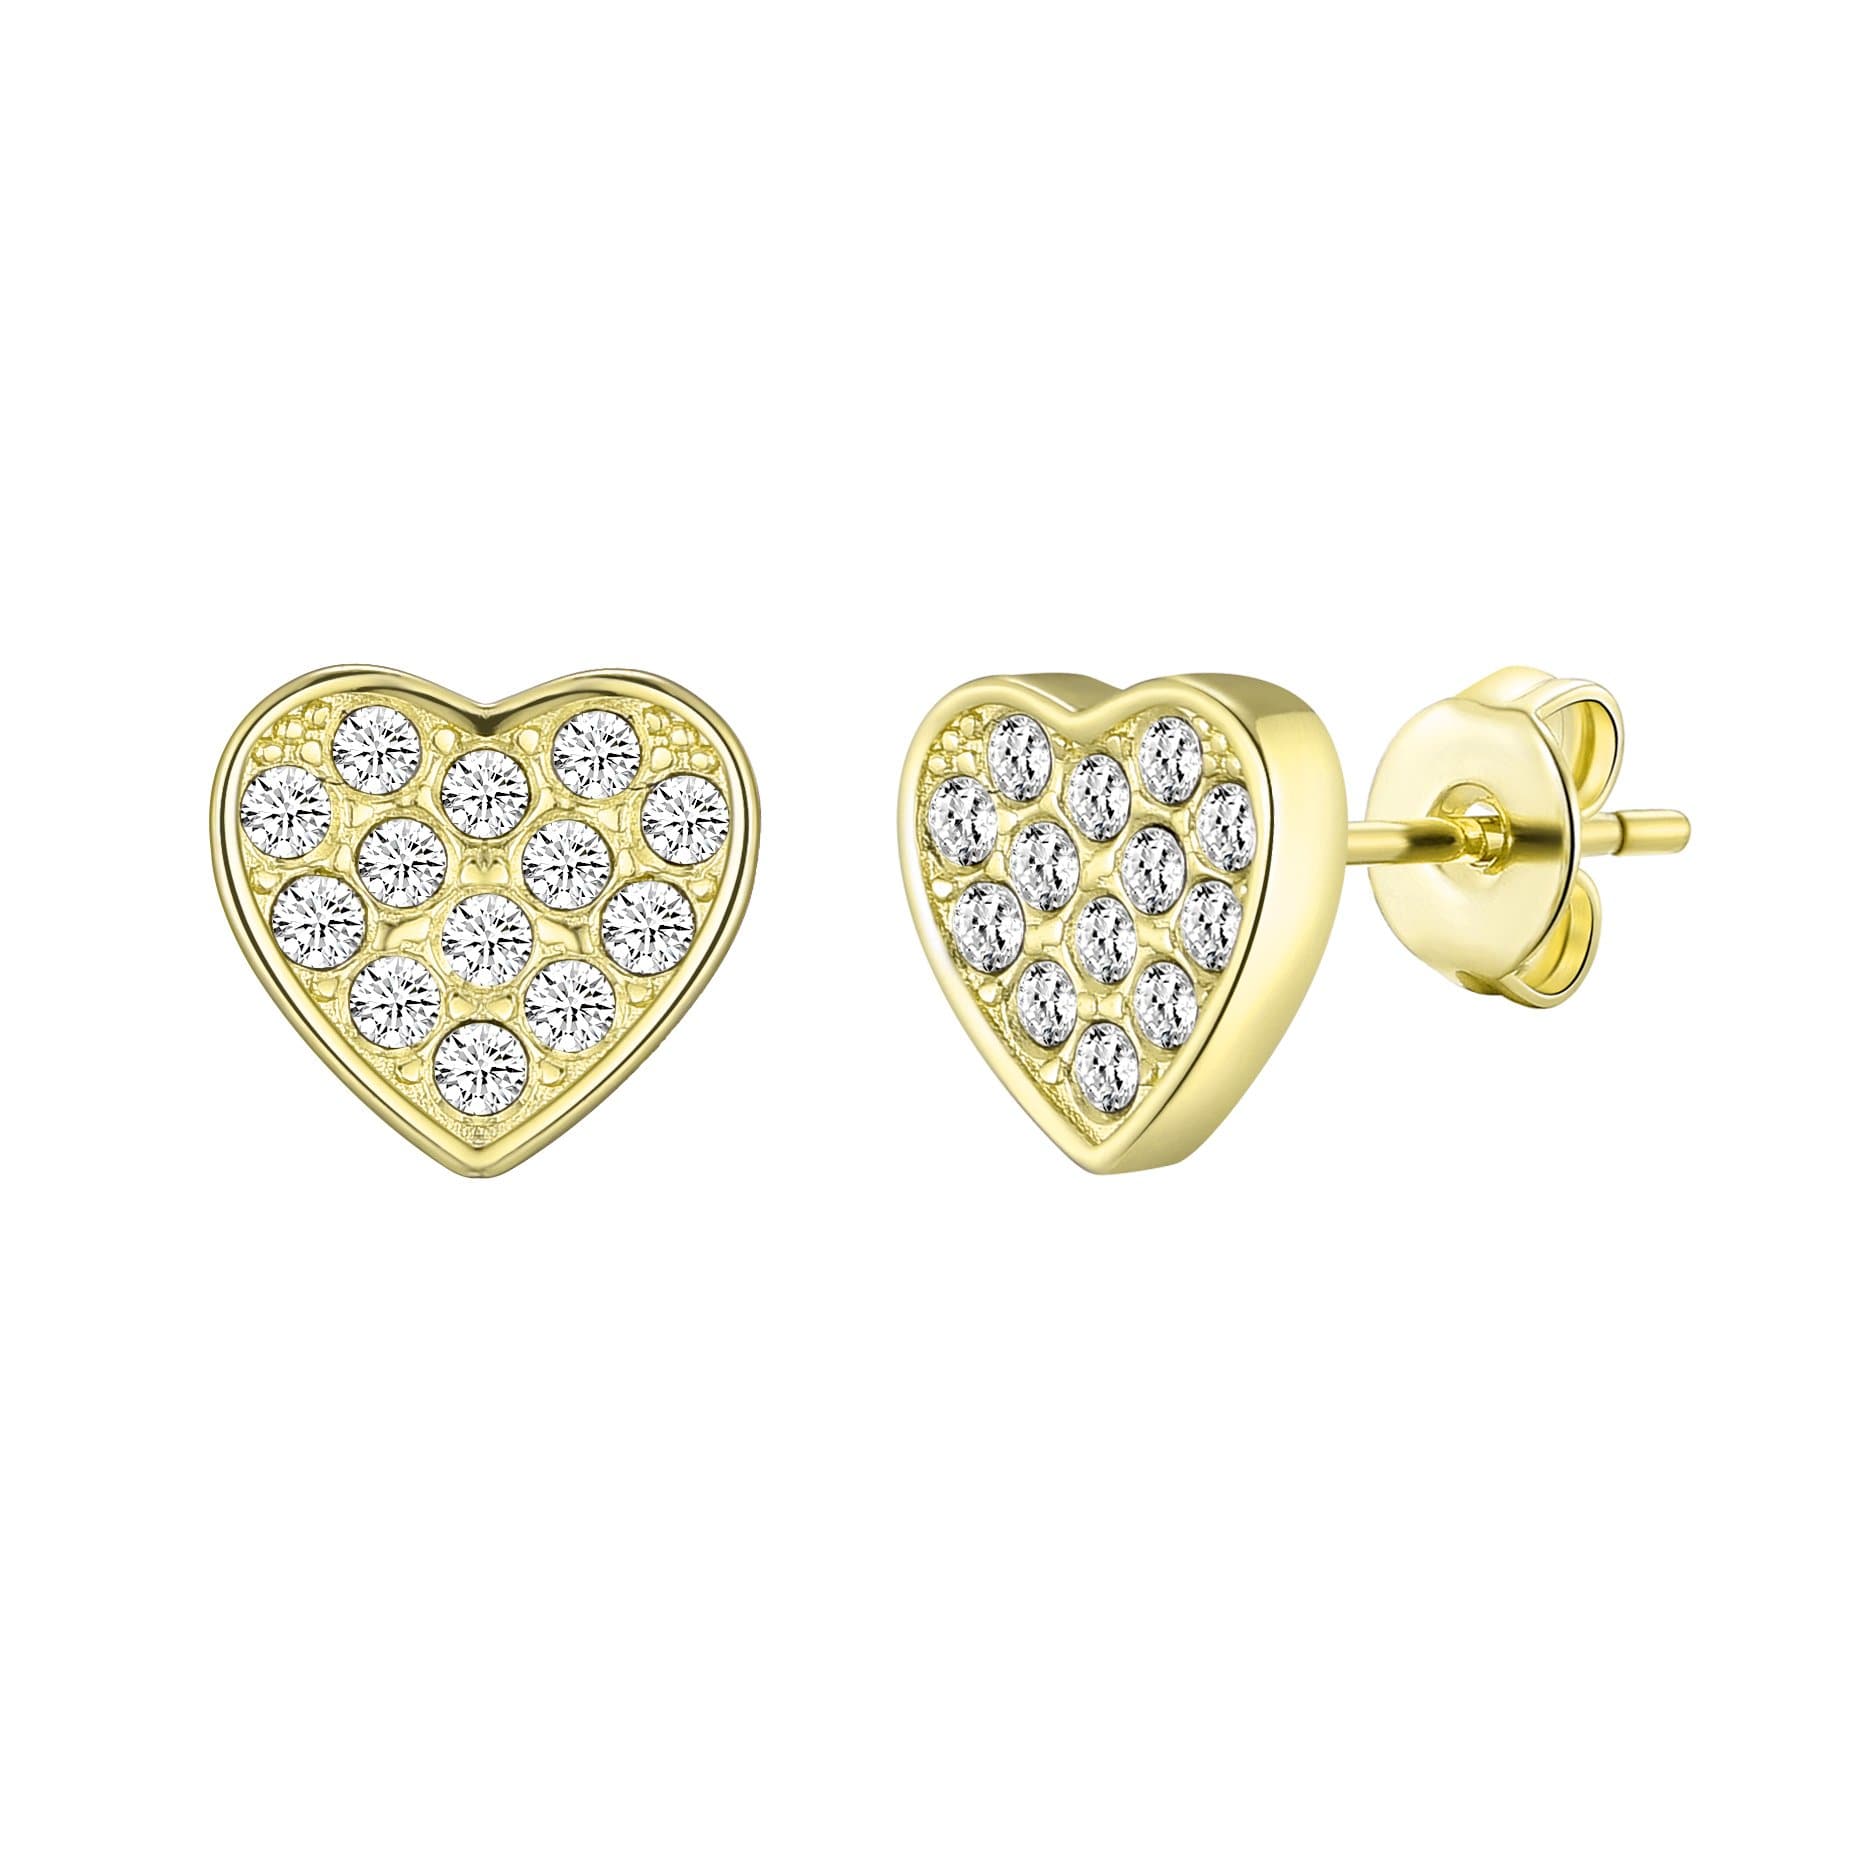 Gold Plated Pave Heart Earrings Created with Zircondia® Crystals by Philip Jones Jewellery